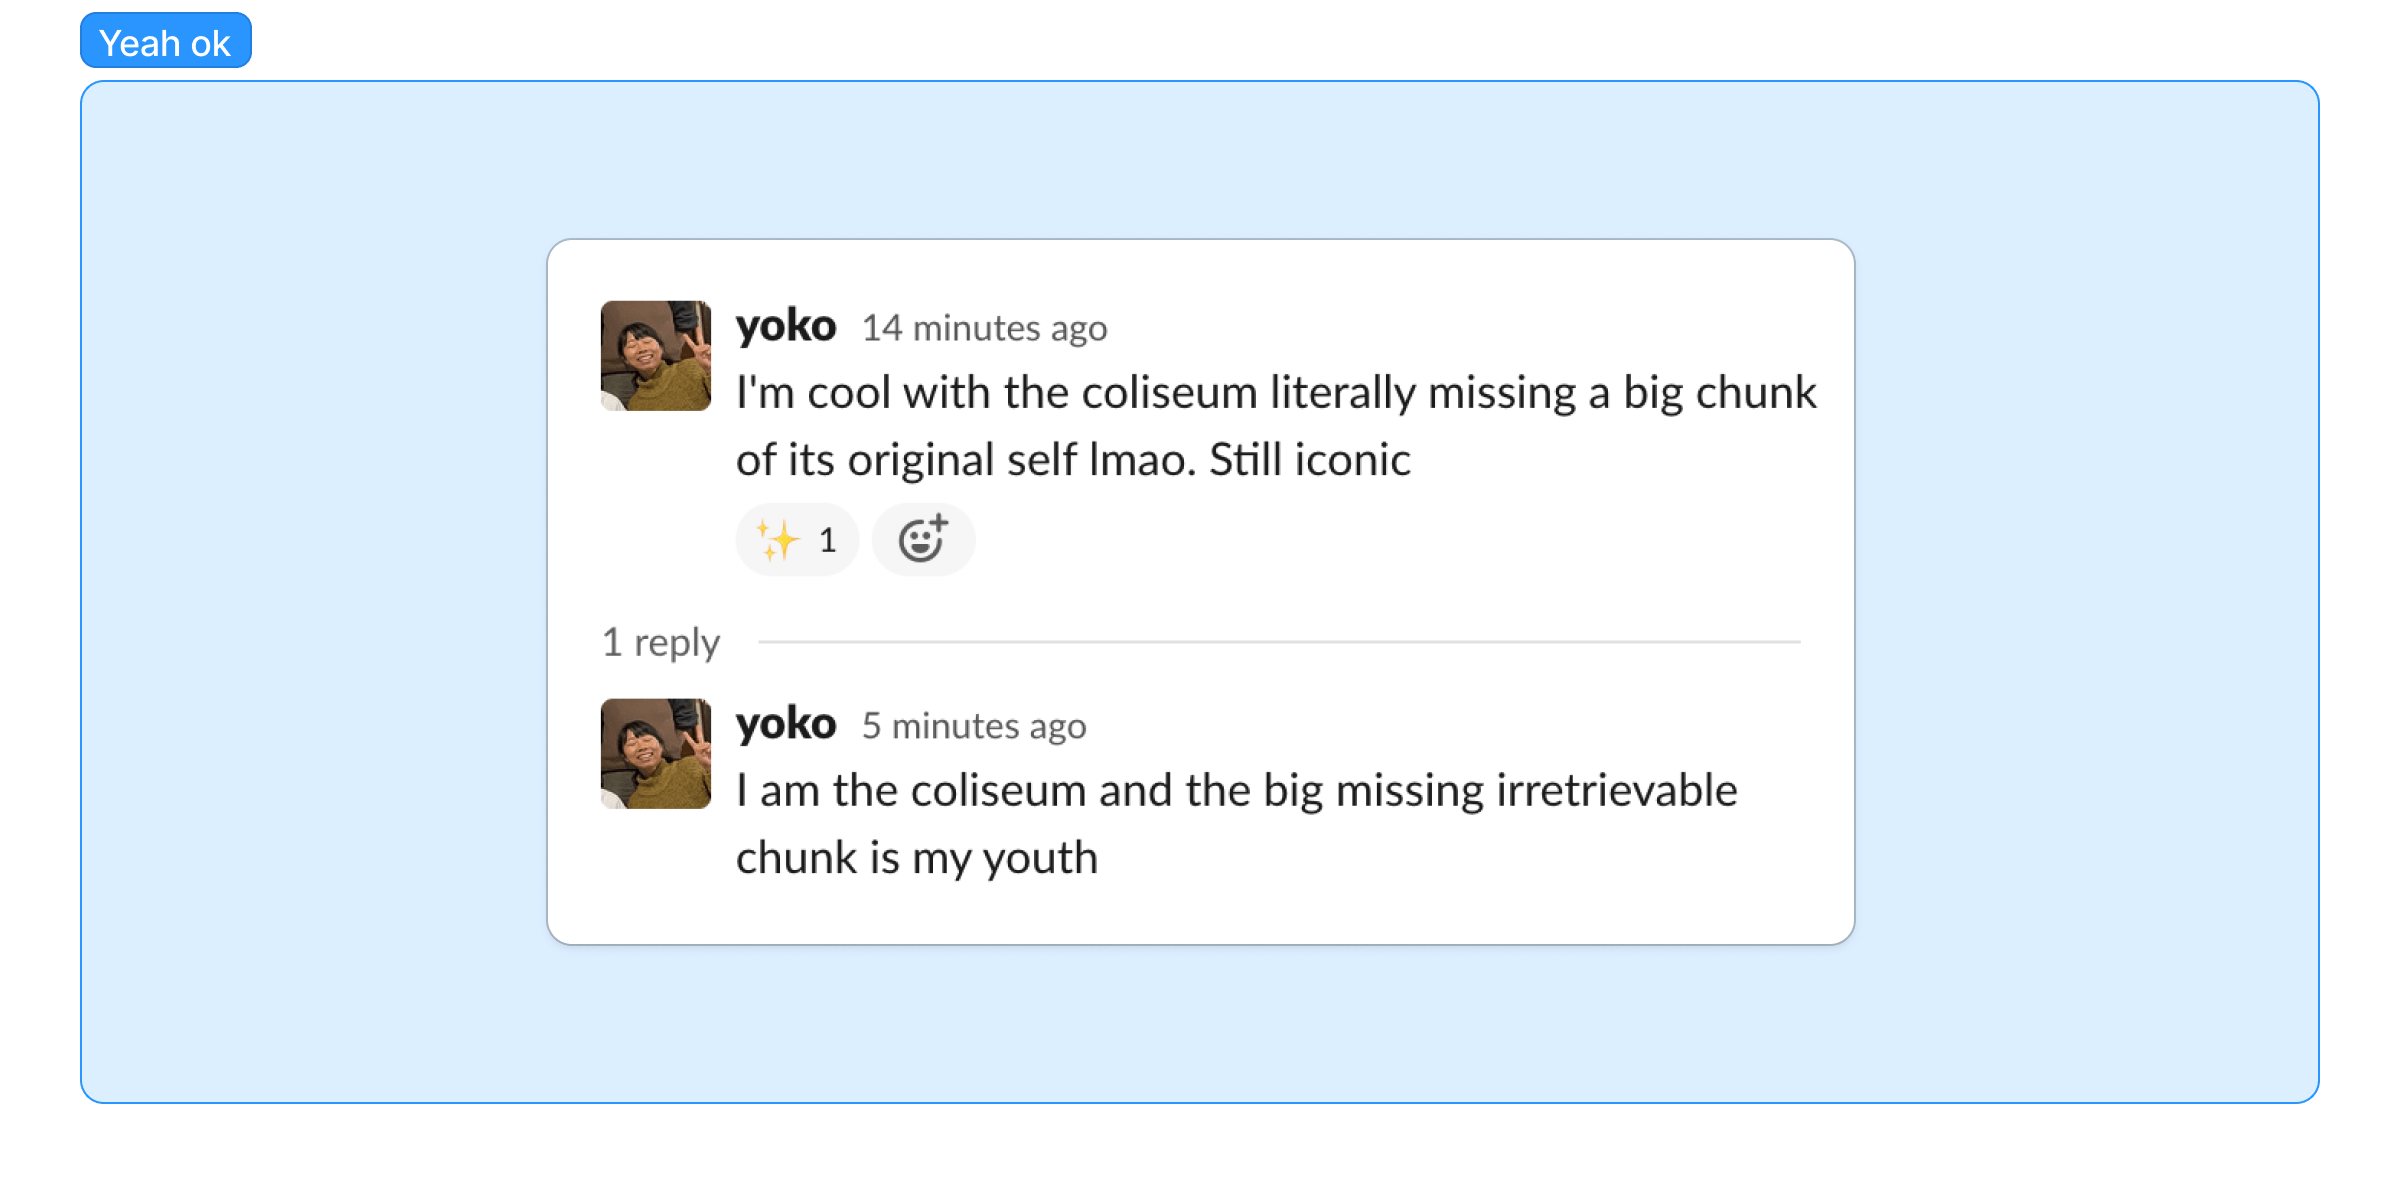 It’s a screenshot of me saying in Slack: “I’m cool with the coliseum literally missing a big chunk of its original self lmao. Still iconic / I am the coliseum and the big missing irretrievable chunk is my youth”